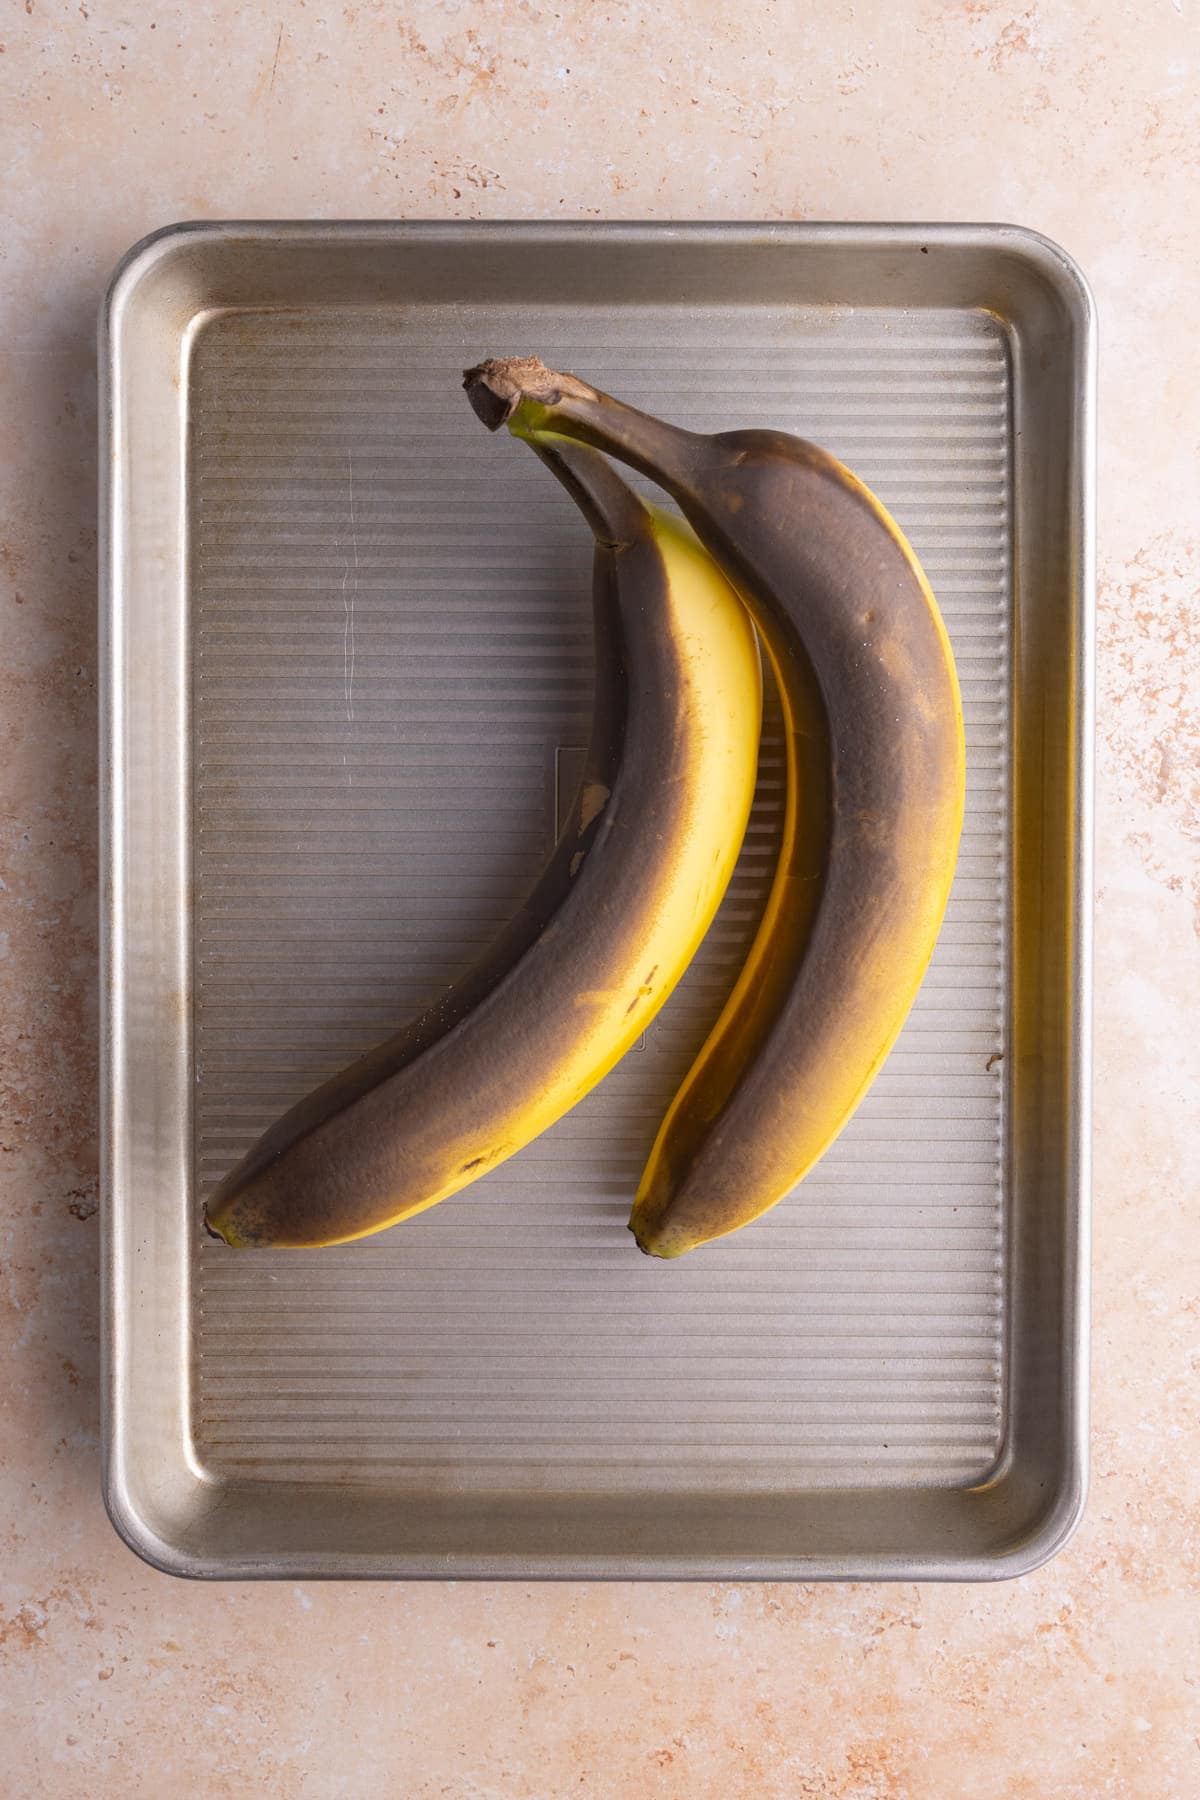 Ripening bananas in the oven as it preheats